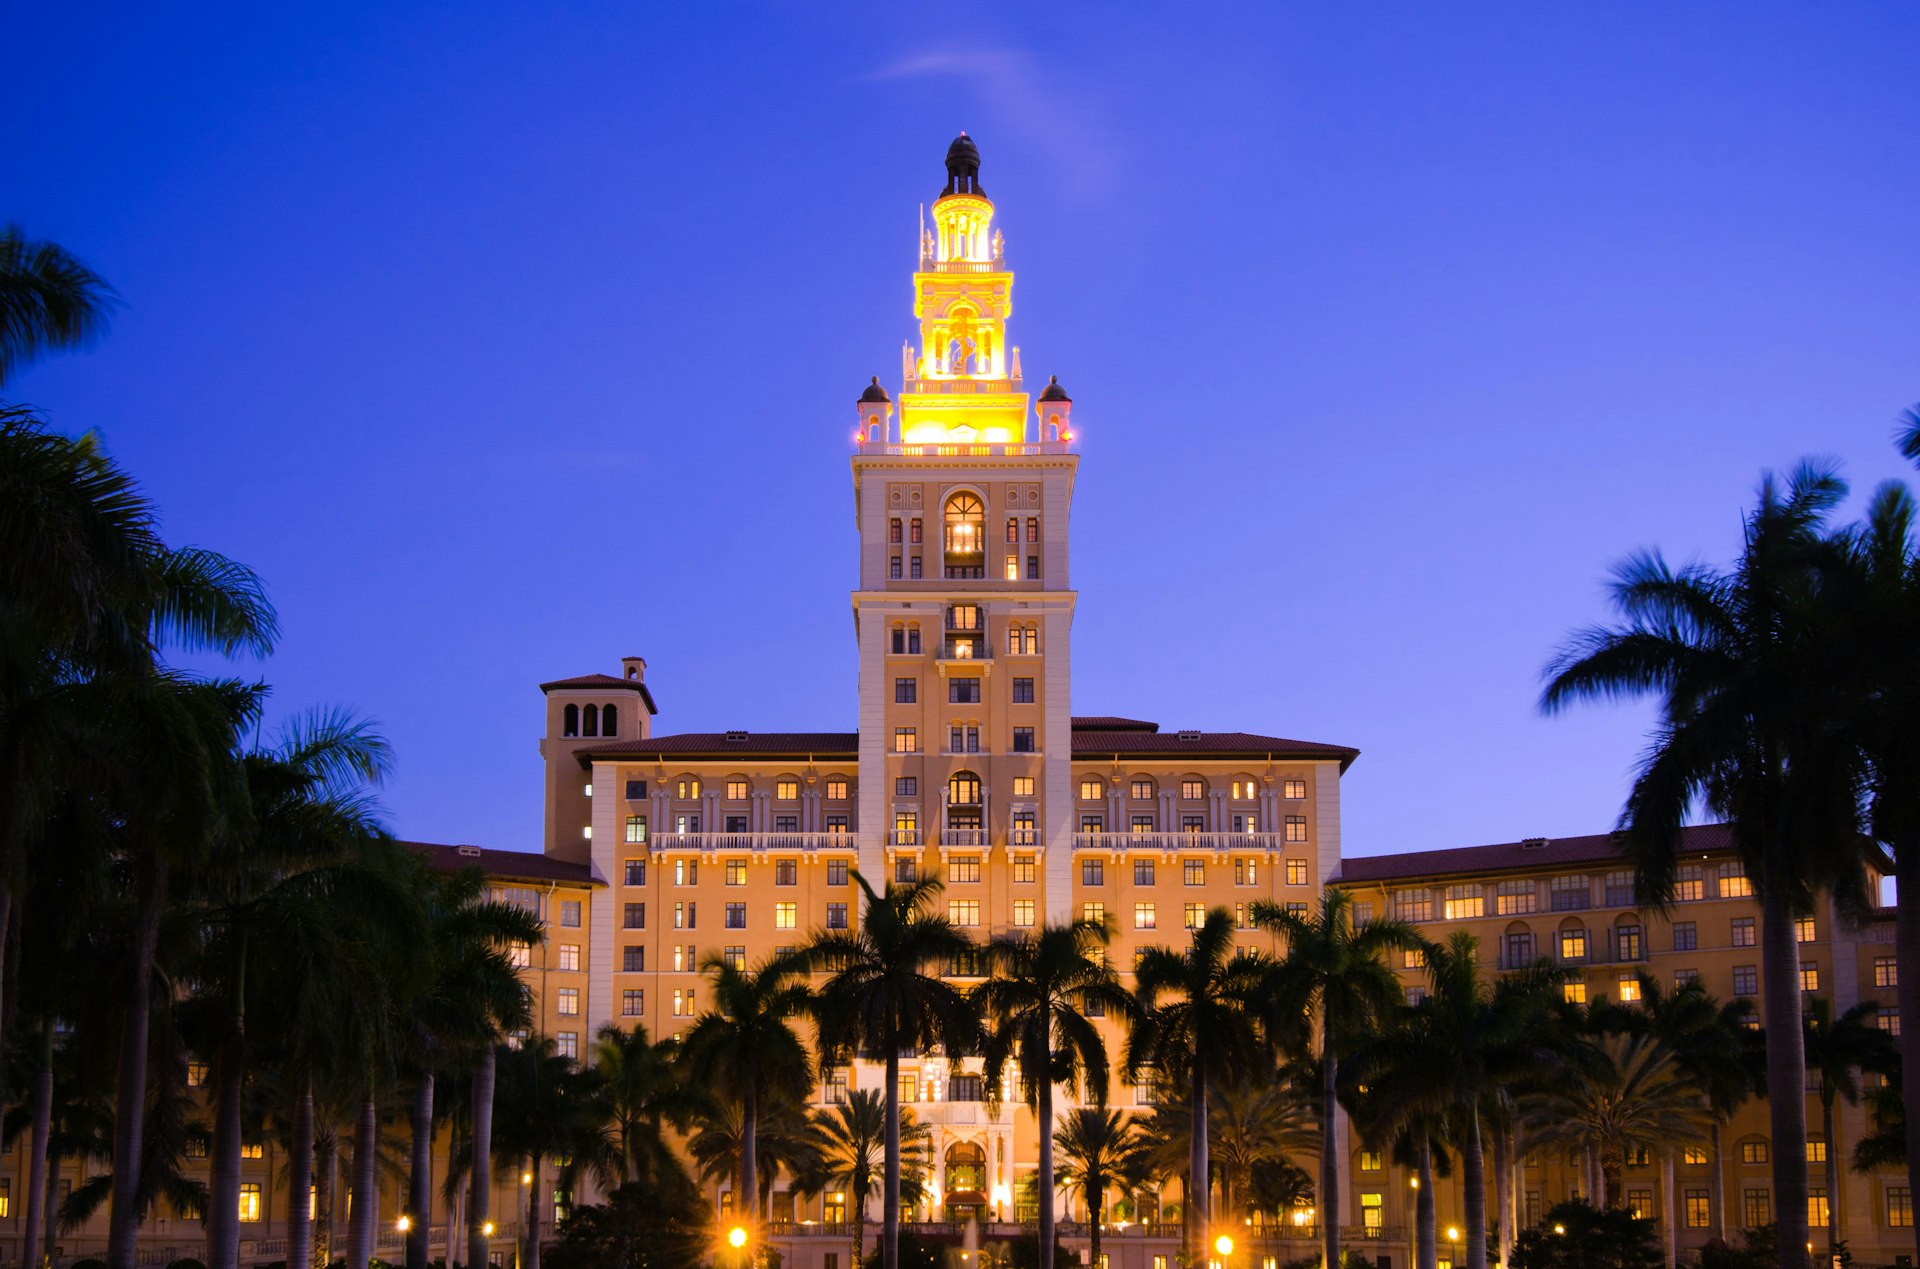 View from across the street of the famous Biltmore Hotel in Coral Gables, FL at night